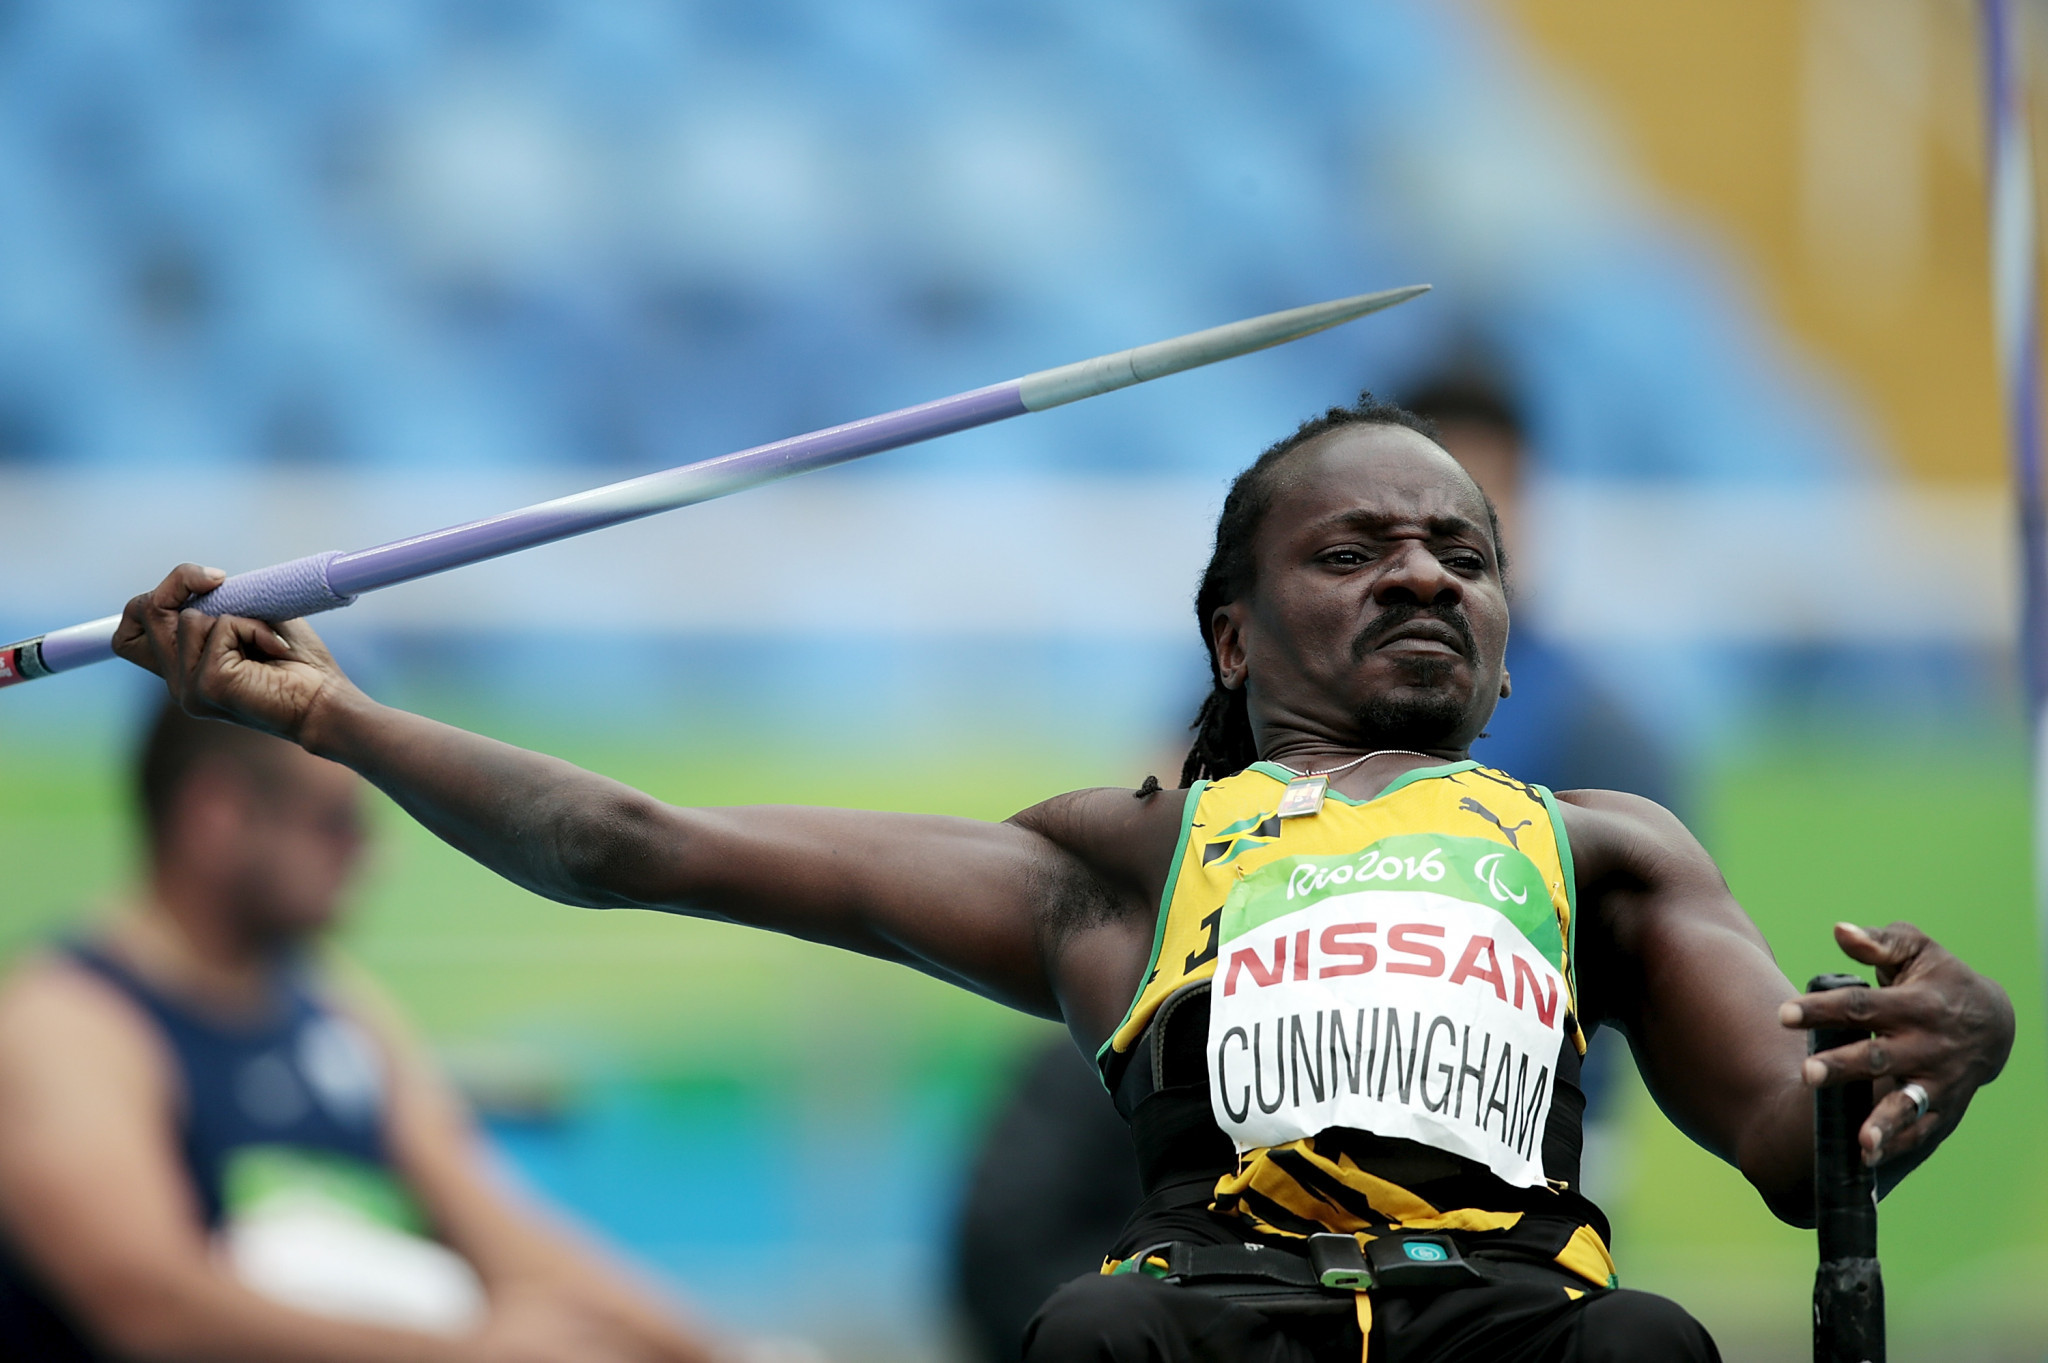 Alphanso Cunningham earned Jamaica's last Paralympic gold at London 2012 ©Getty Images